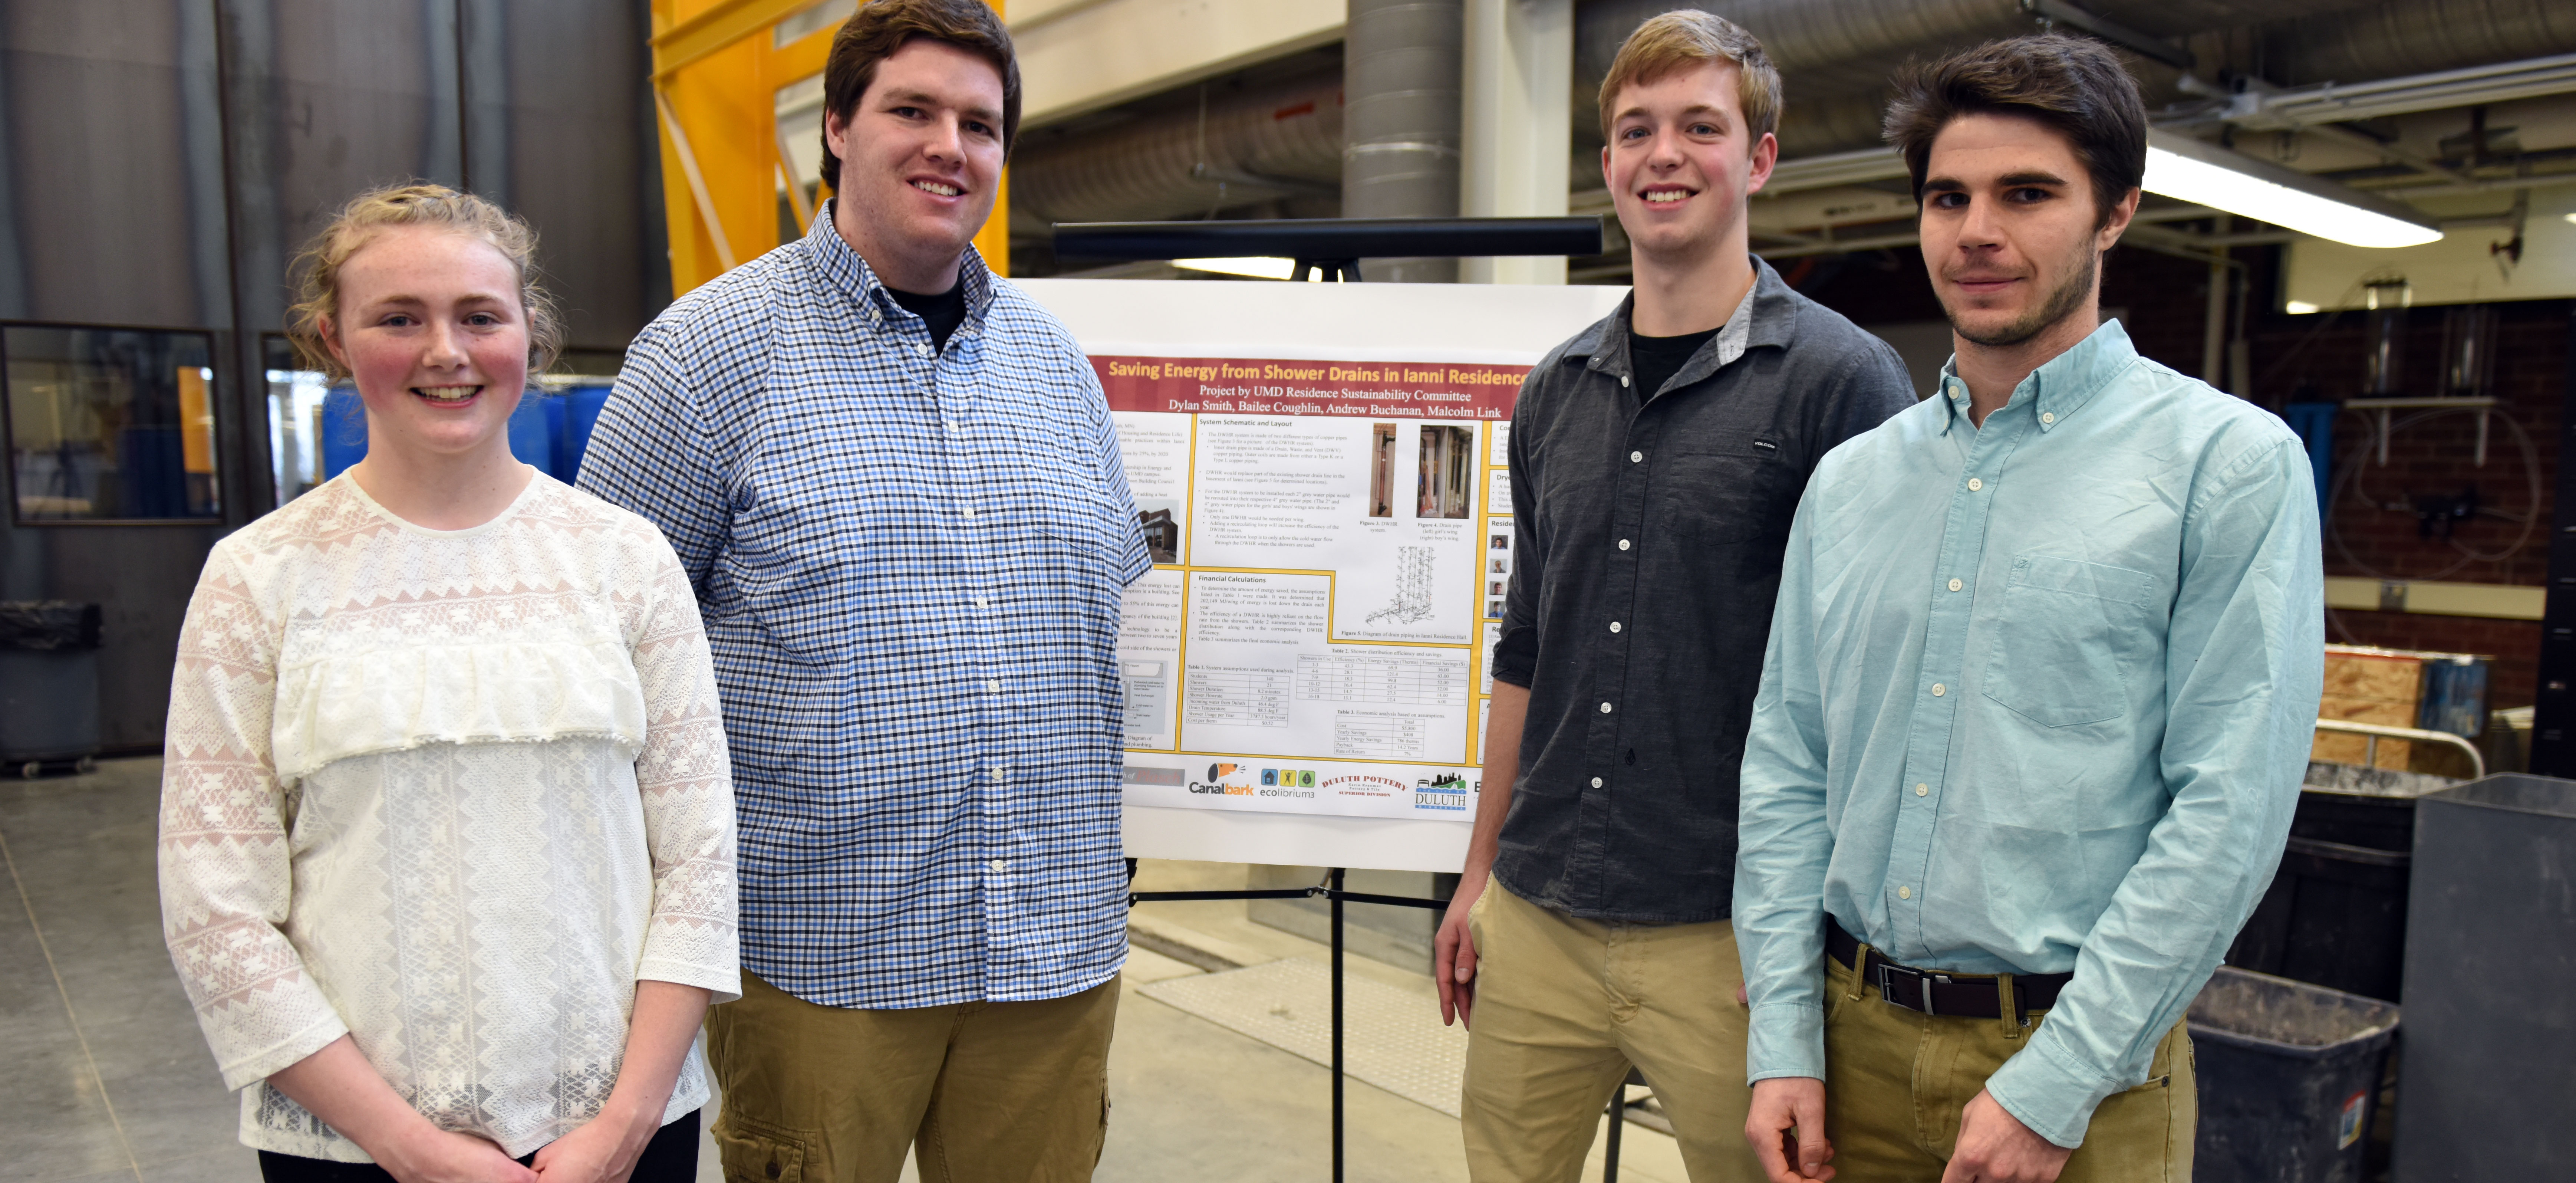 Duluth Shines Poster Session